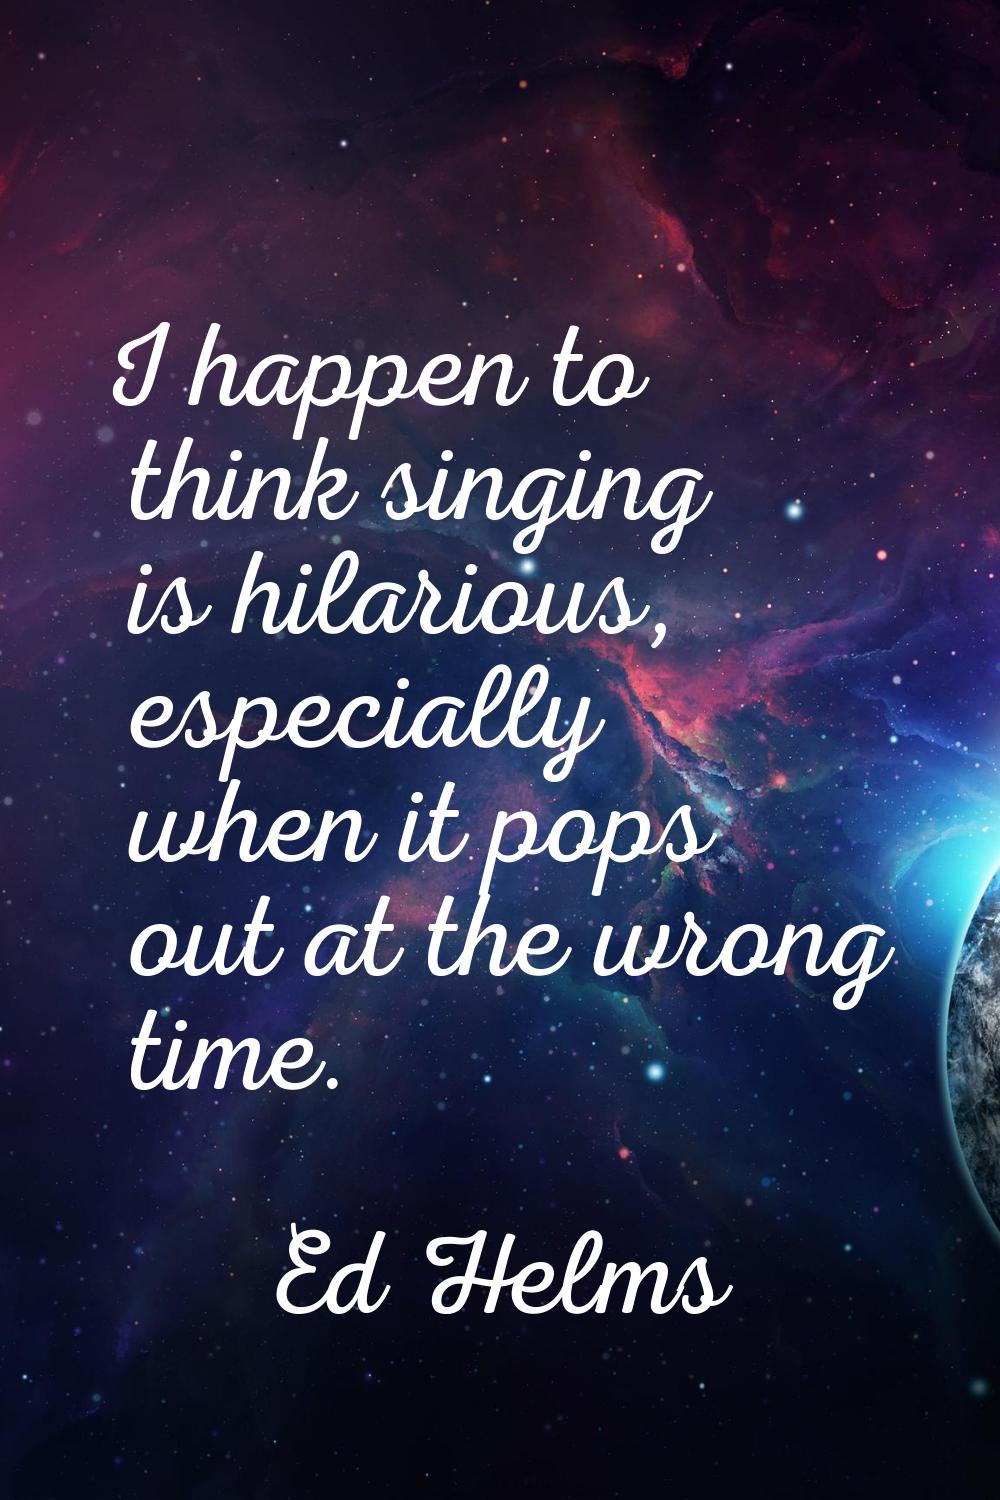 I happen to think singing is hilarious, especially when it pops out at the wrong time.